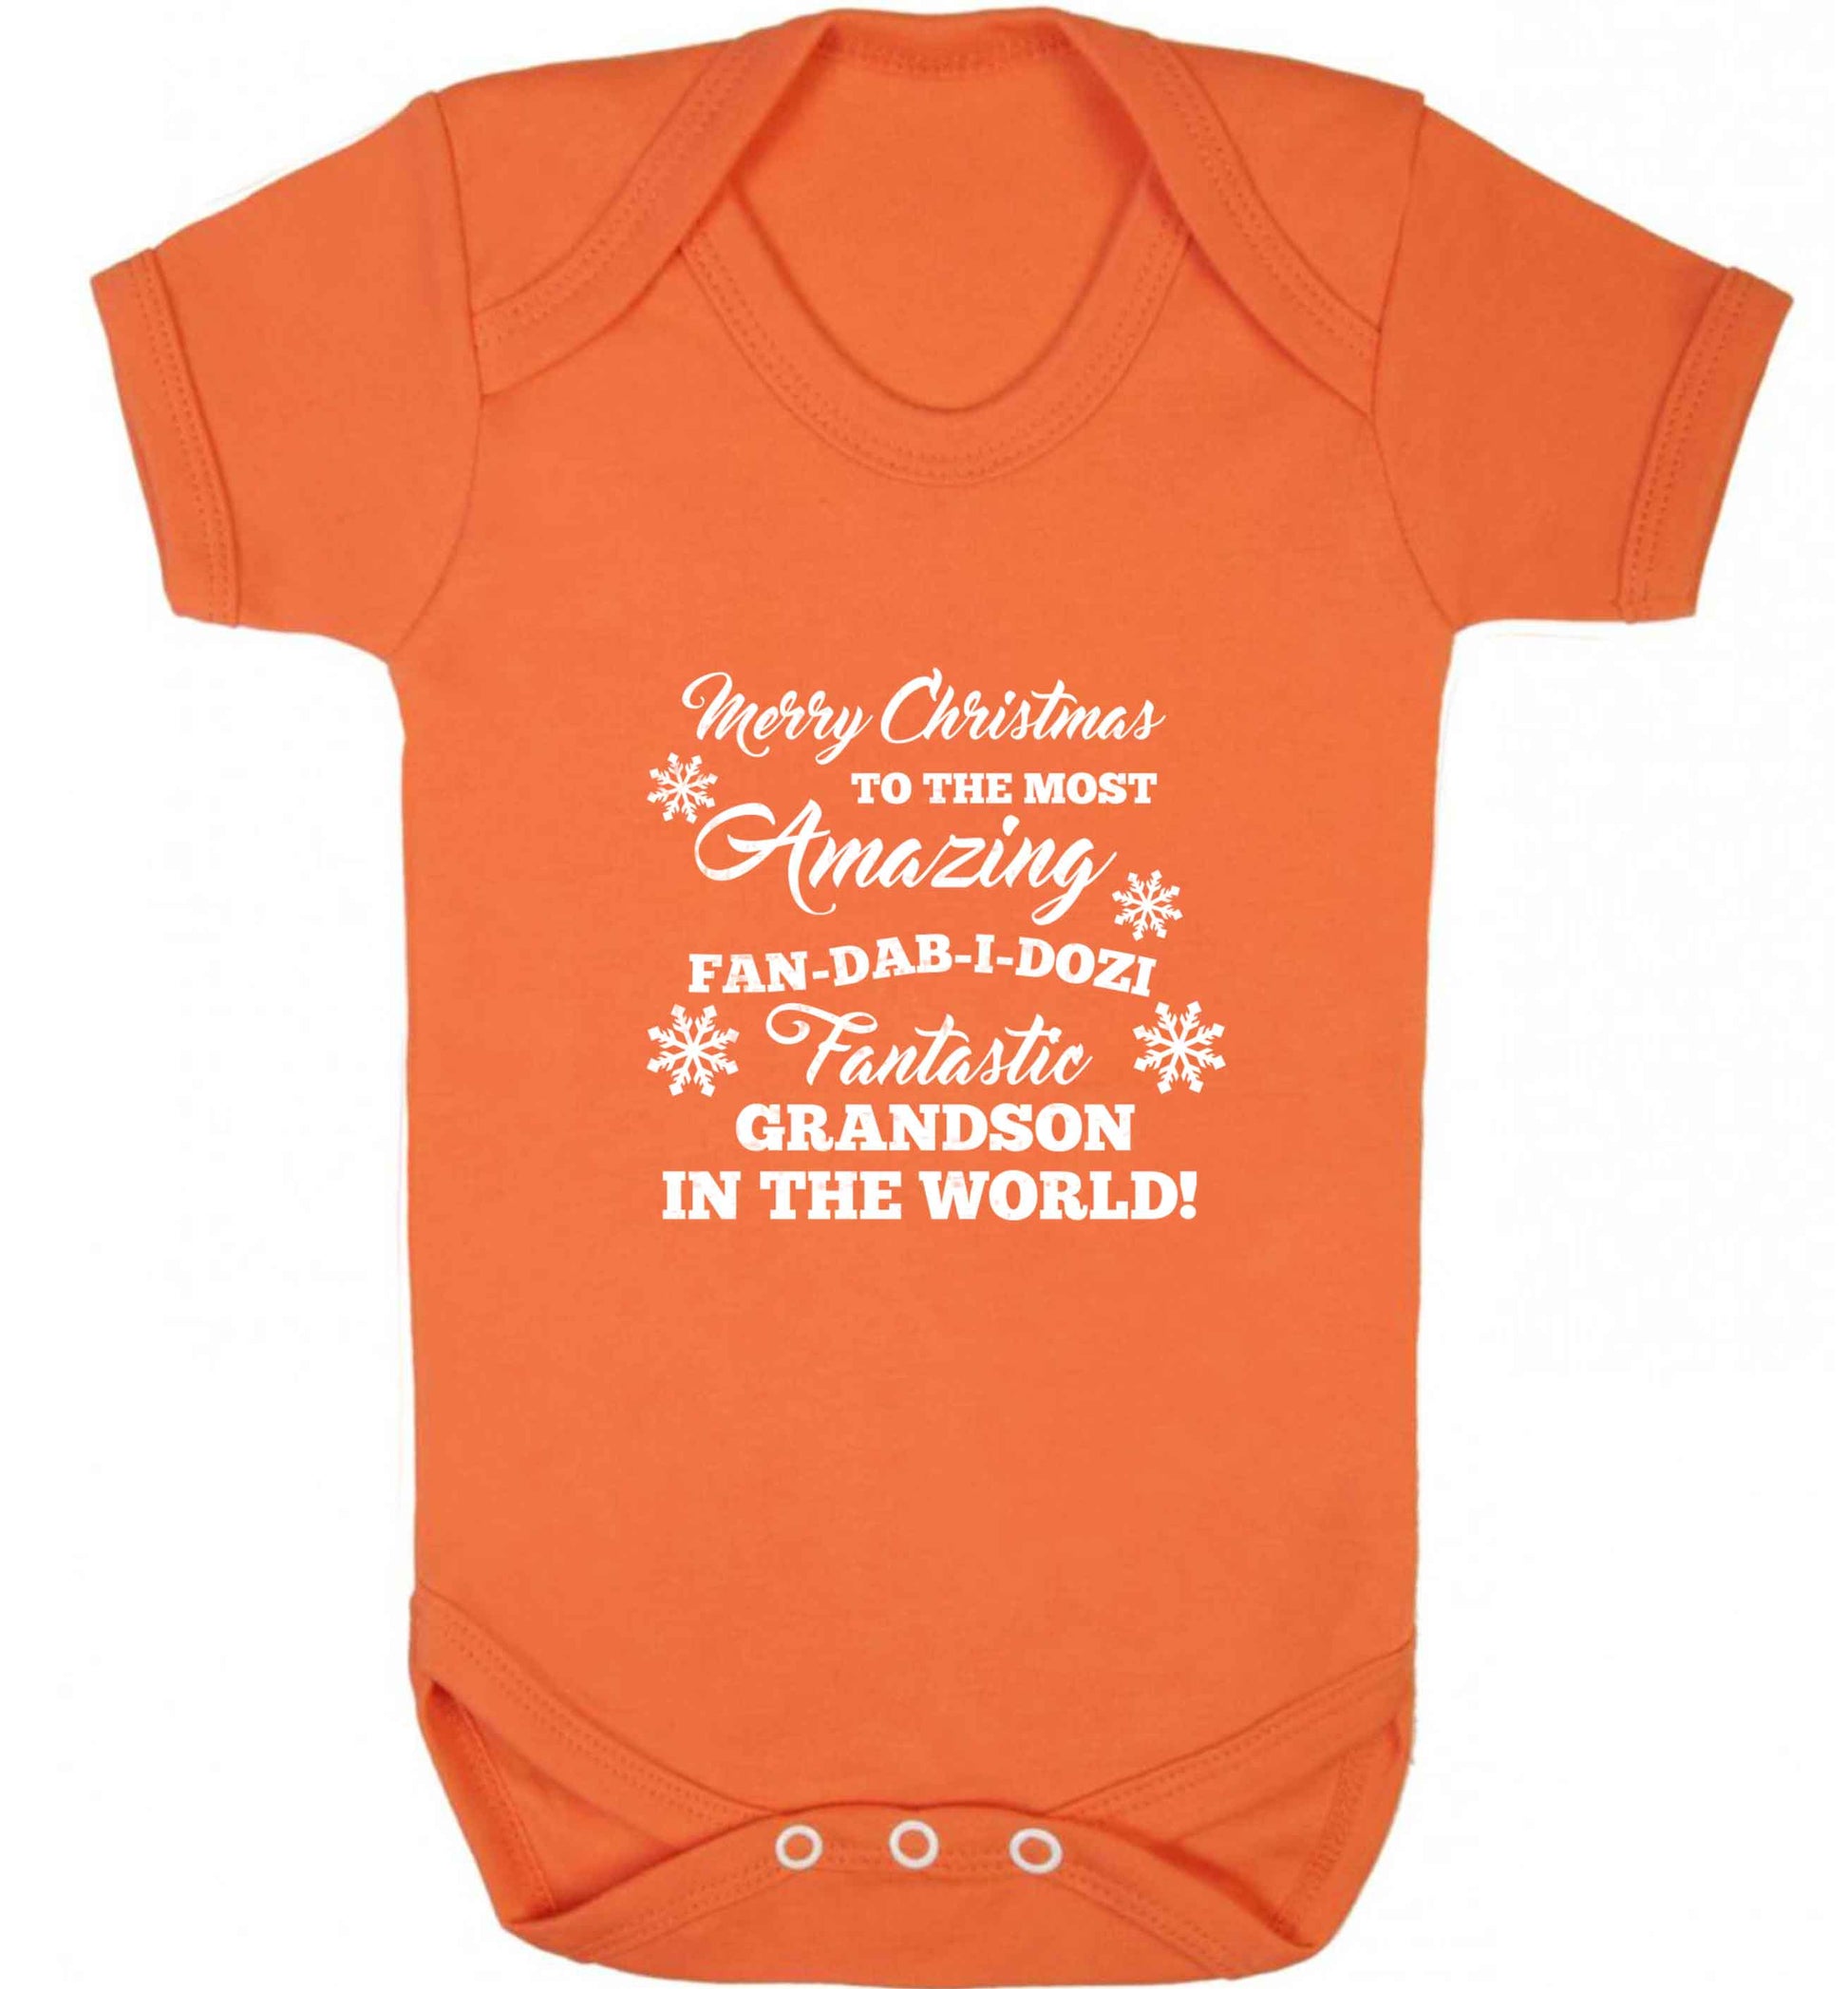 Merry Christmas to the most amazing fan-dab-i-dozi fantasic Grandson in the world baby vest orange 18-24 months